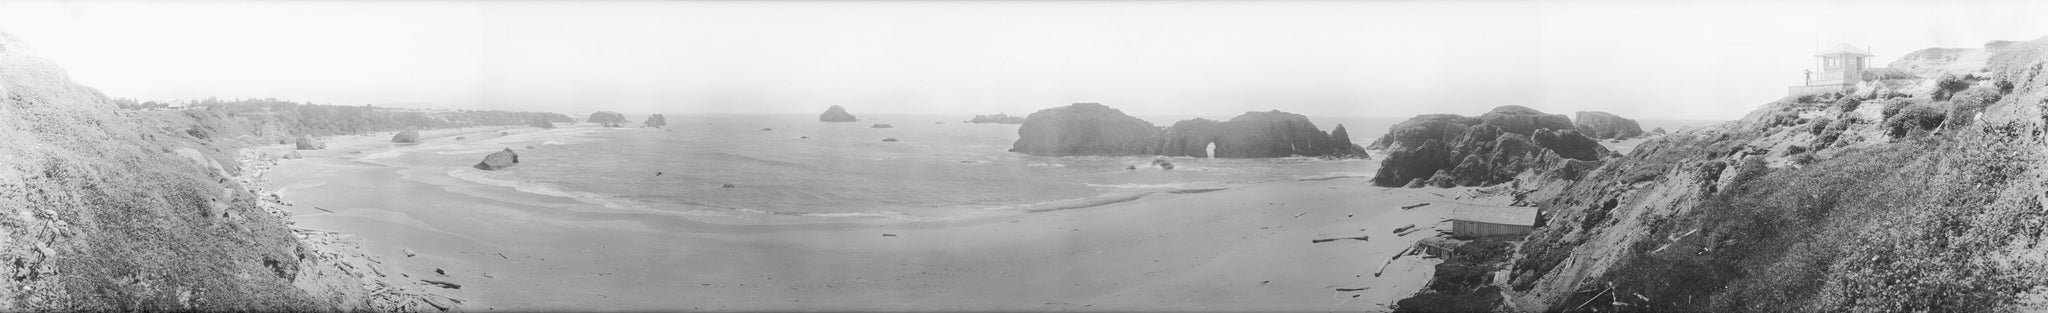 Lookout Point at Bandon’s Coquille Point, including the U.S. Life Saving Service lookout and boathouse, circa 1914. -- Courtesy Bandon Historical Society Museum